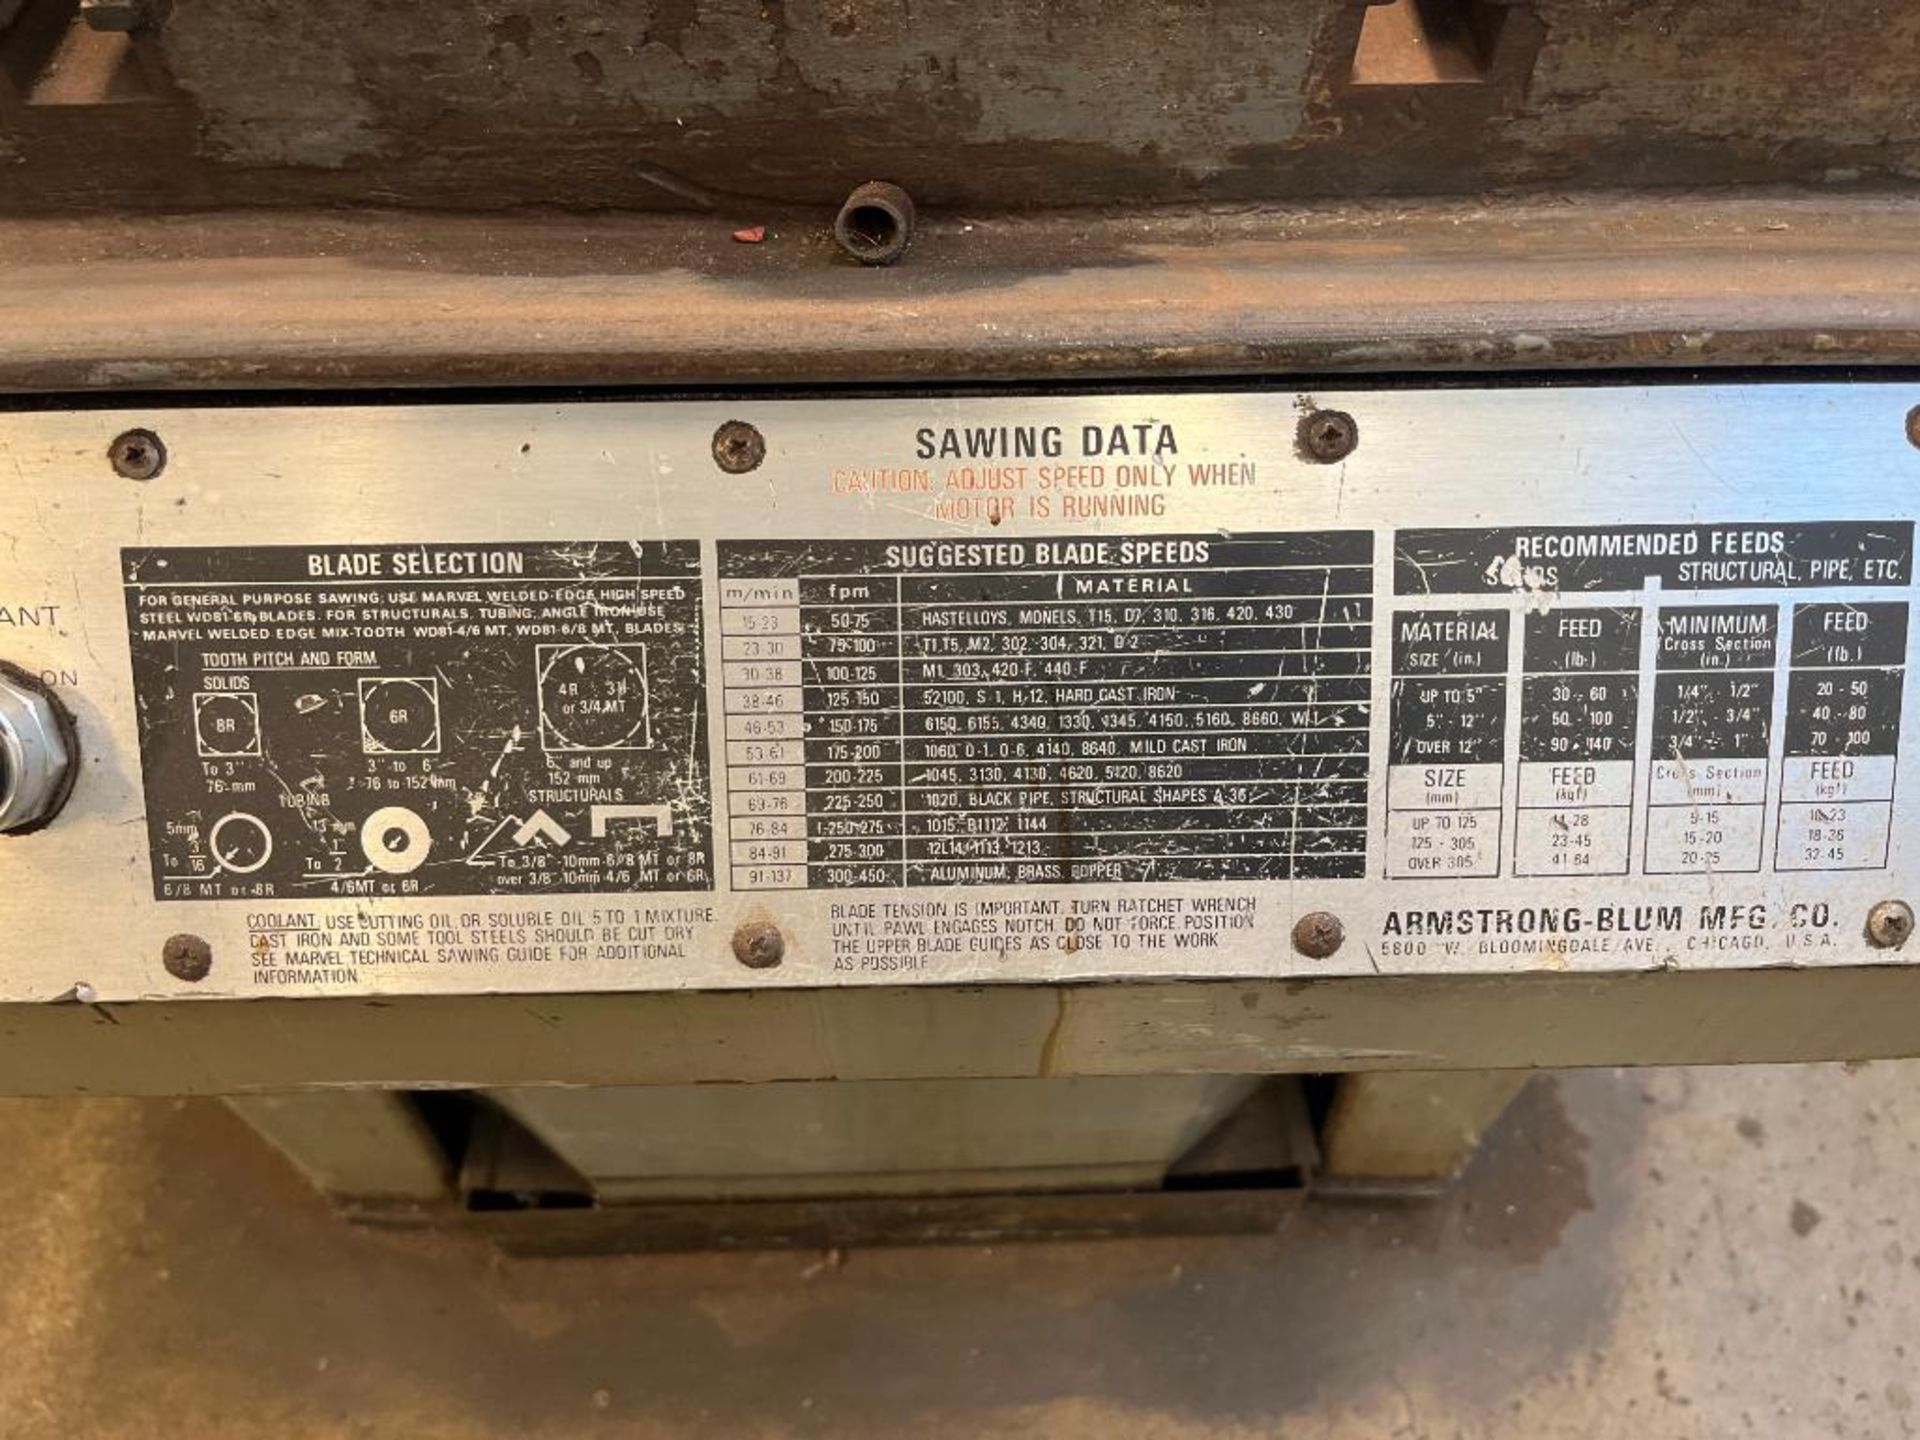 Marvel Series 8 Mark 1 Roll-in Band Saw S/N 820553 - Image 13 of 13